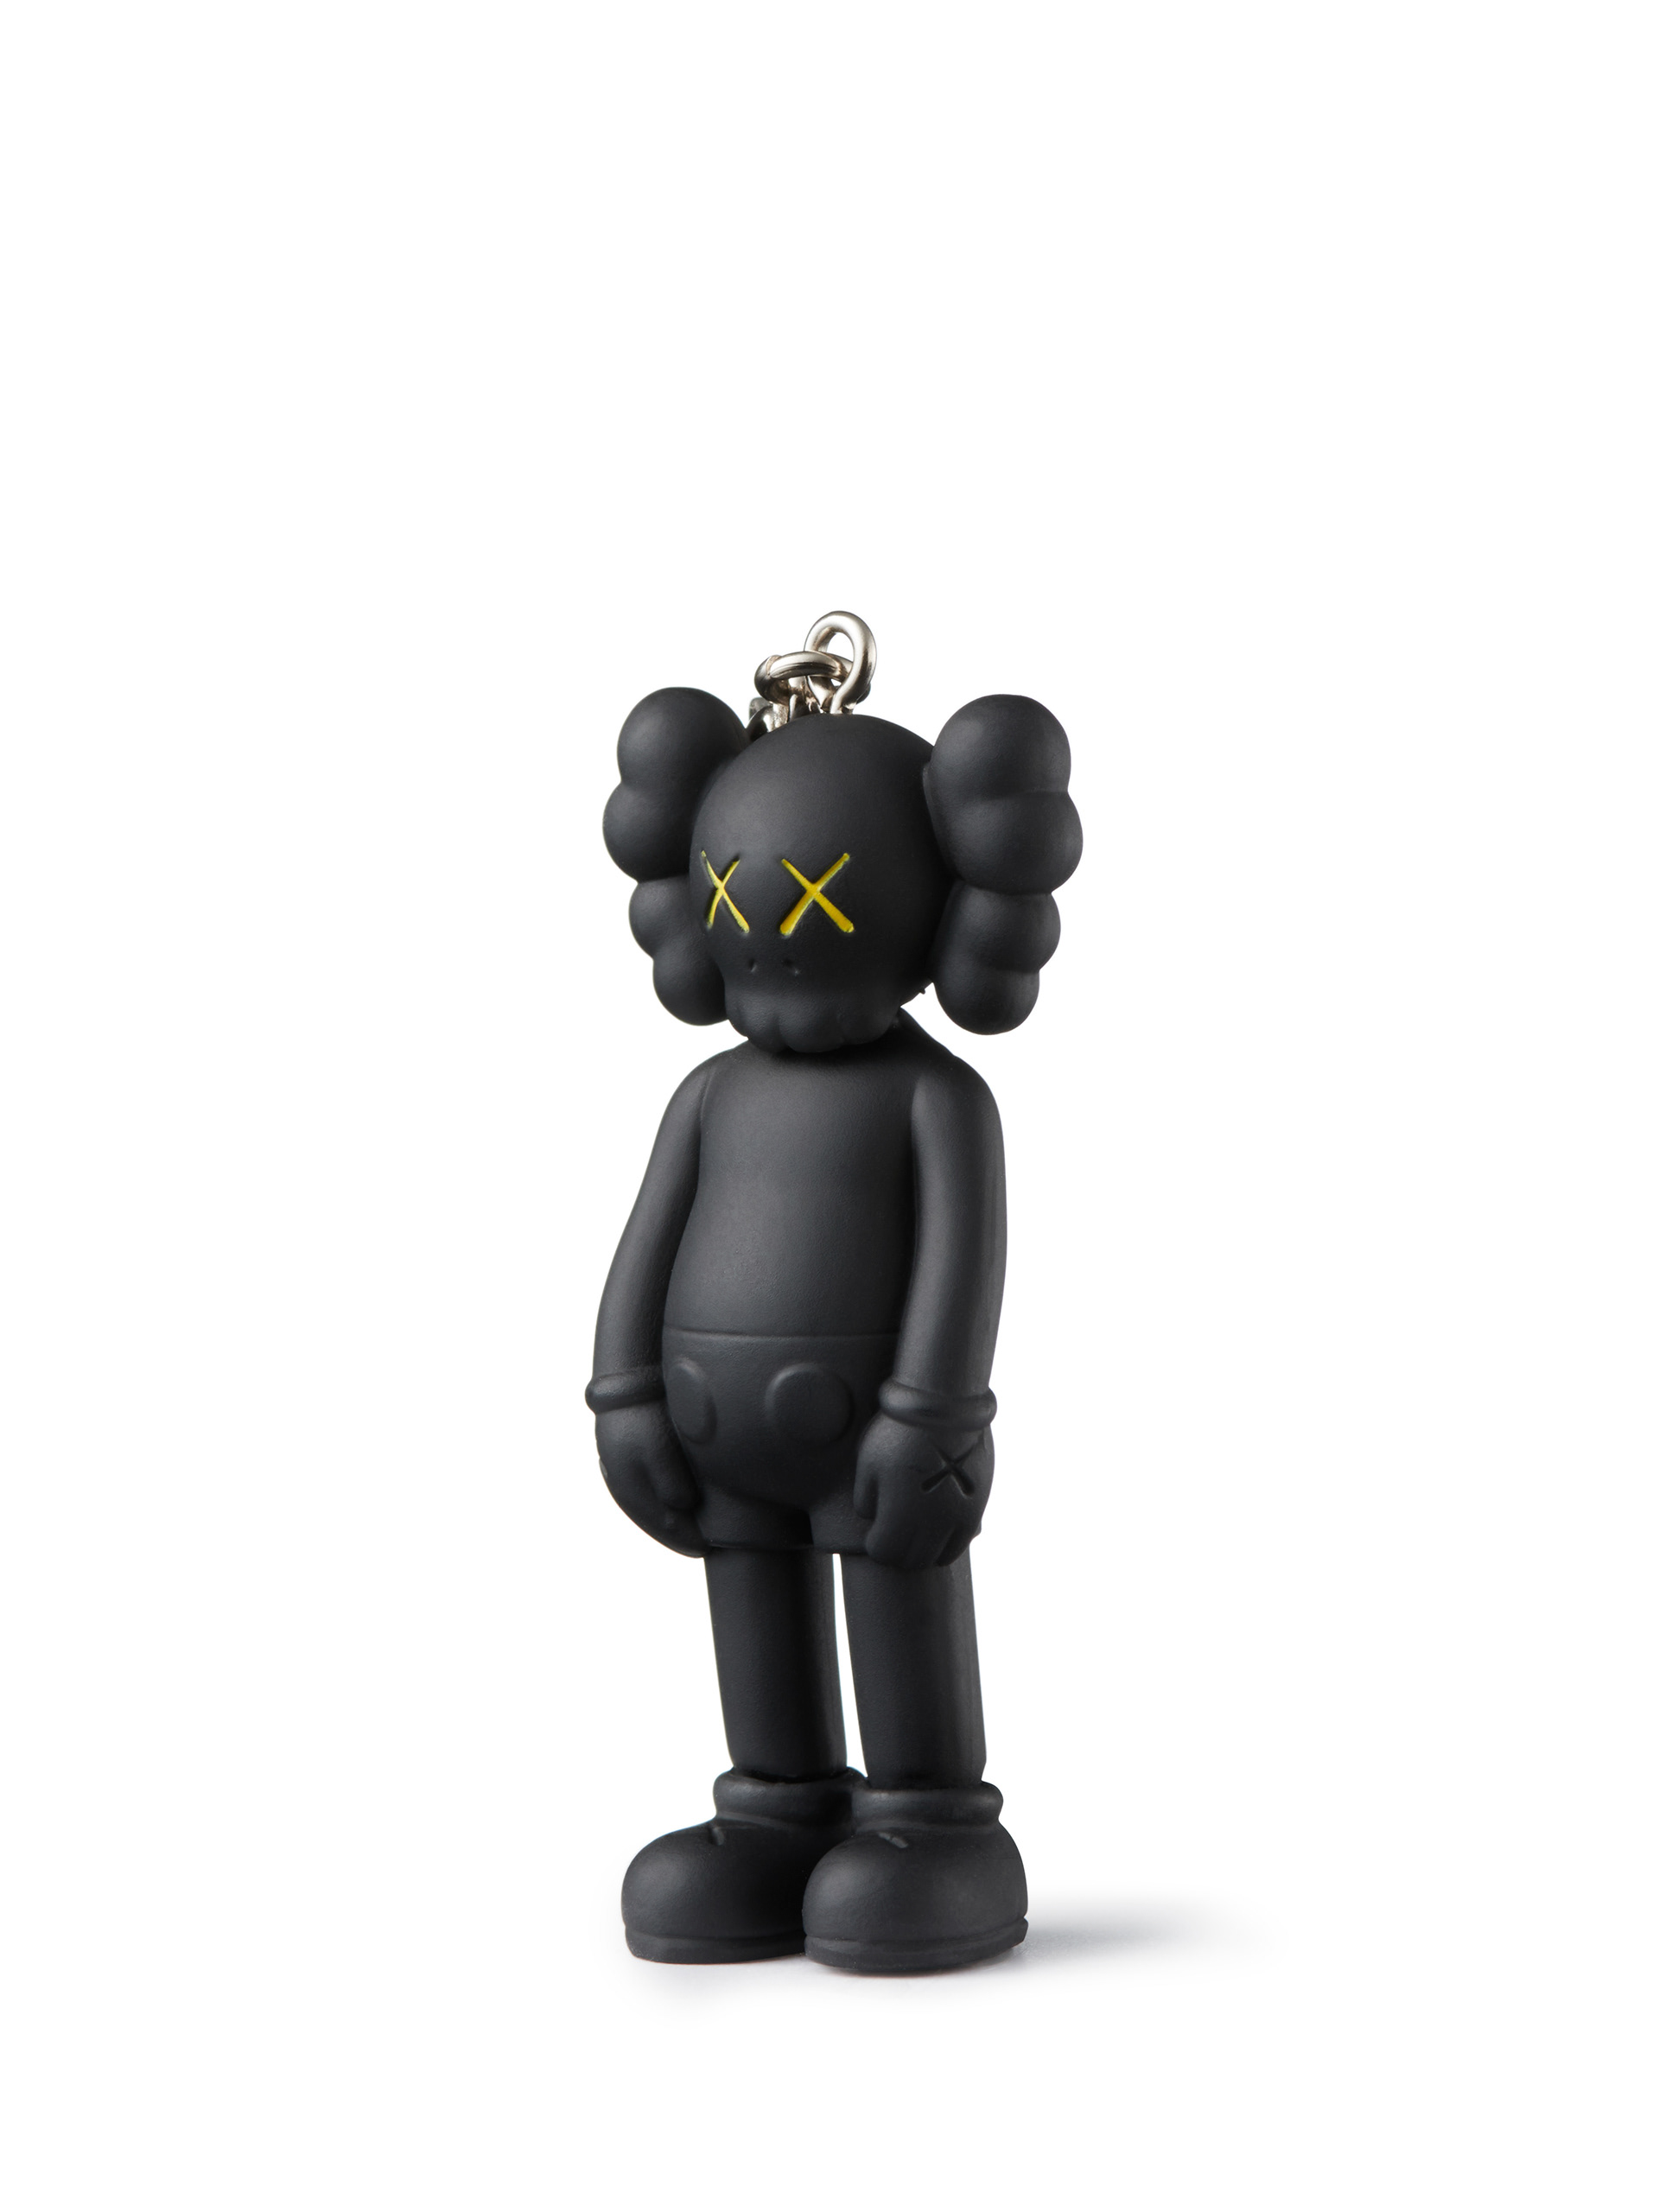 Sold at Auction: KAWS COMPANION KEYCHAIN WHITE